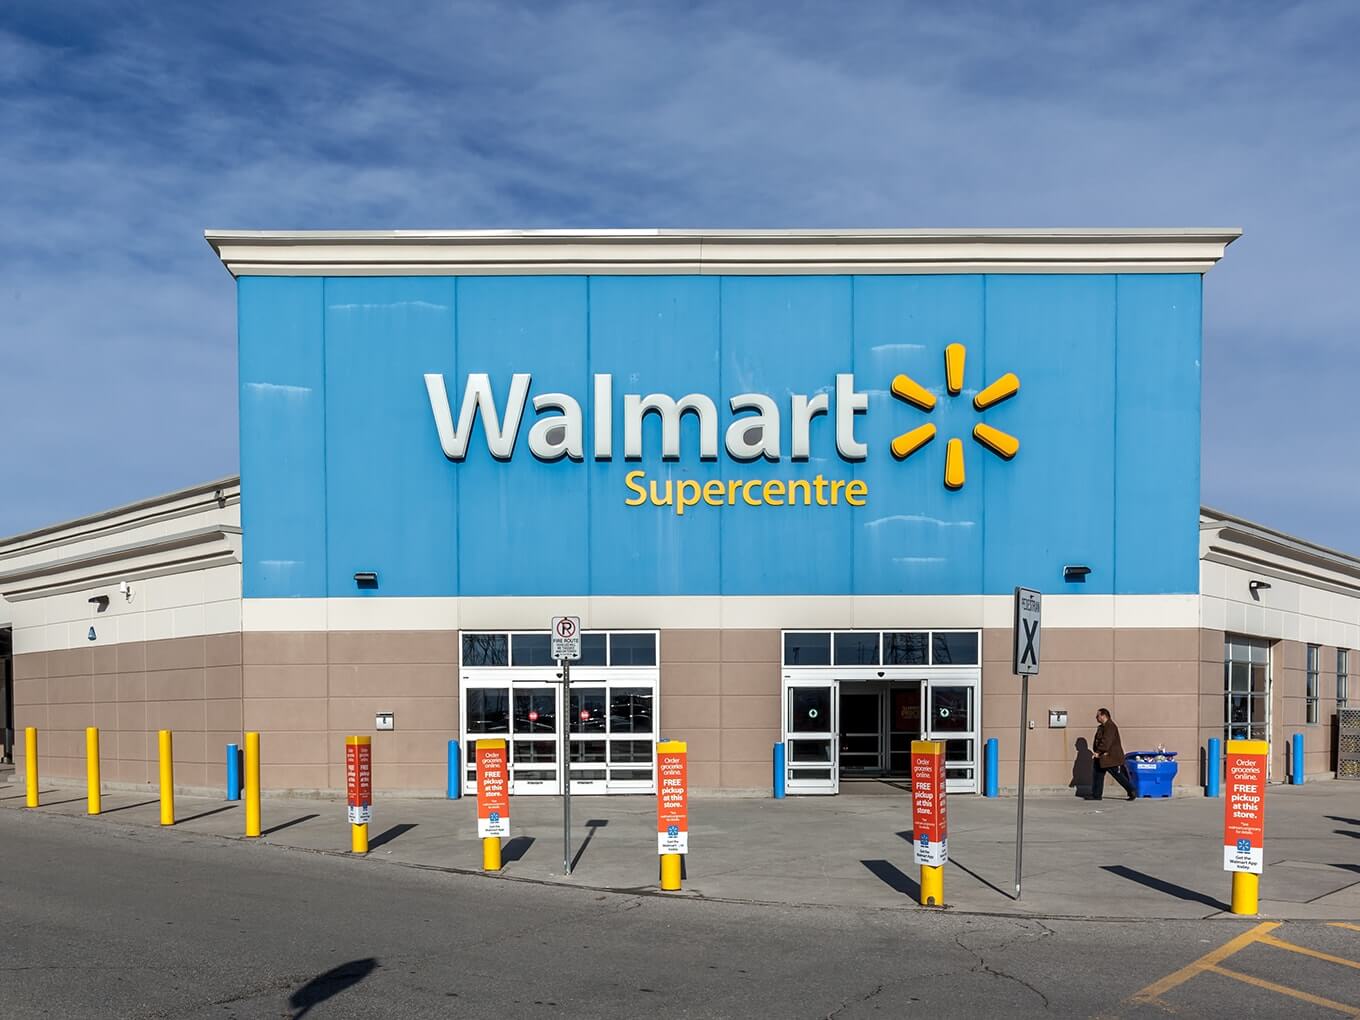 Walmart India Ups Its Game In Wholesale With Second Fulfillment Centre -After Flipkart, Walmart Looks For Tech Acquisition In India